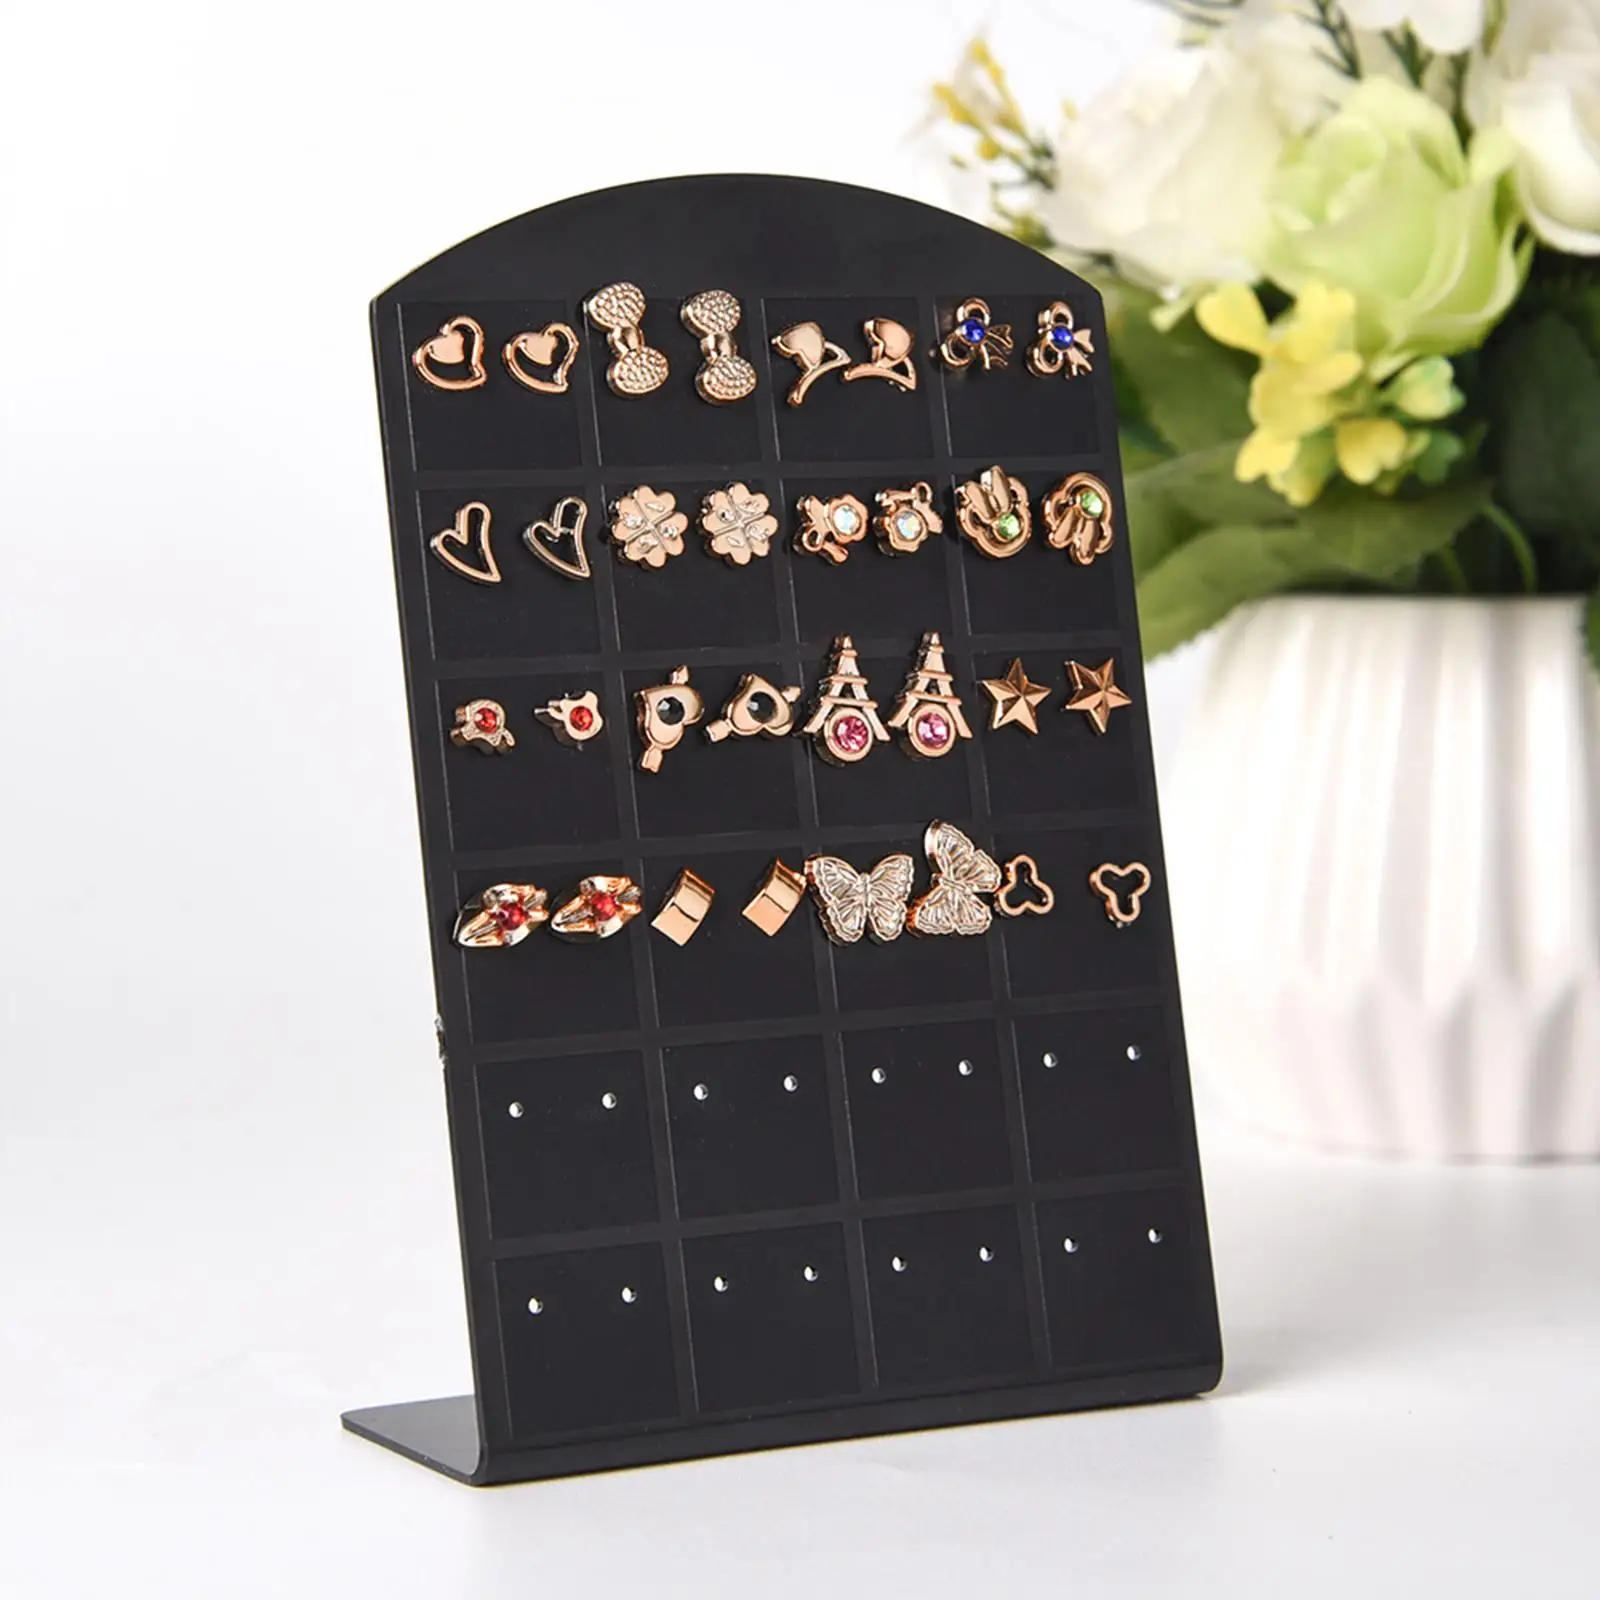 48 Holes Earrings Ear Studs Jewelry Show Display Rack Stand Organizer Holder Showcase Earrings Display for Retail Show Personal